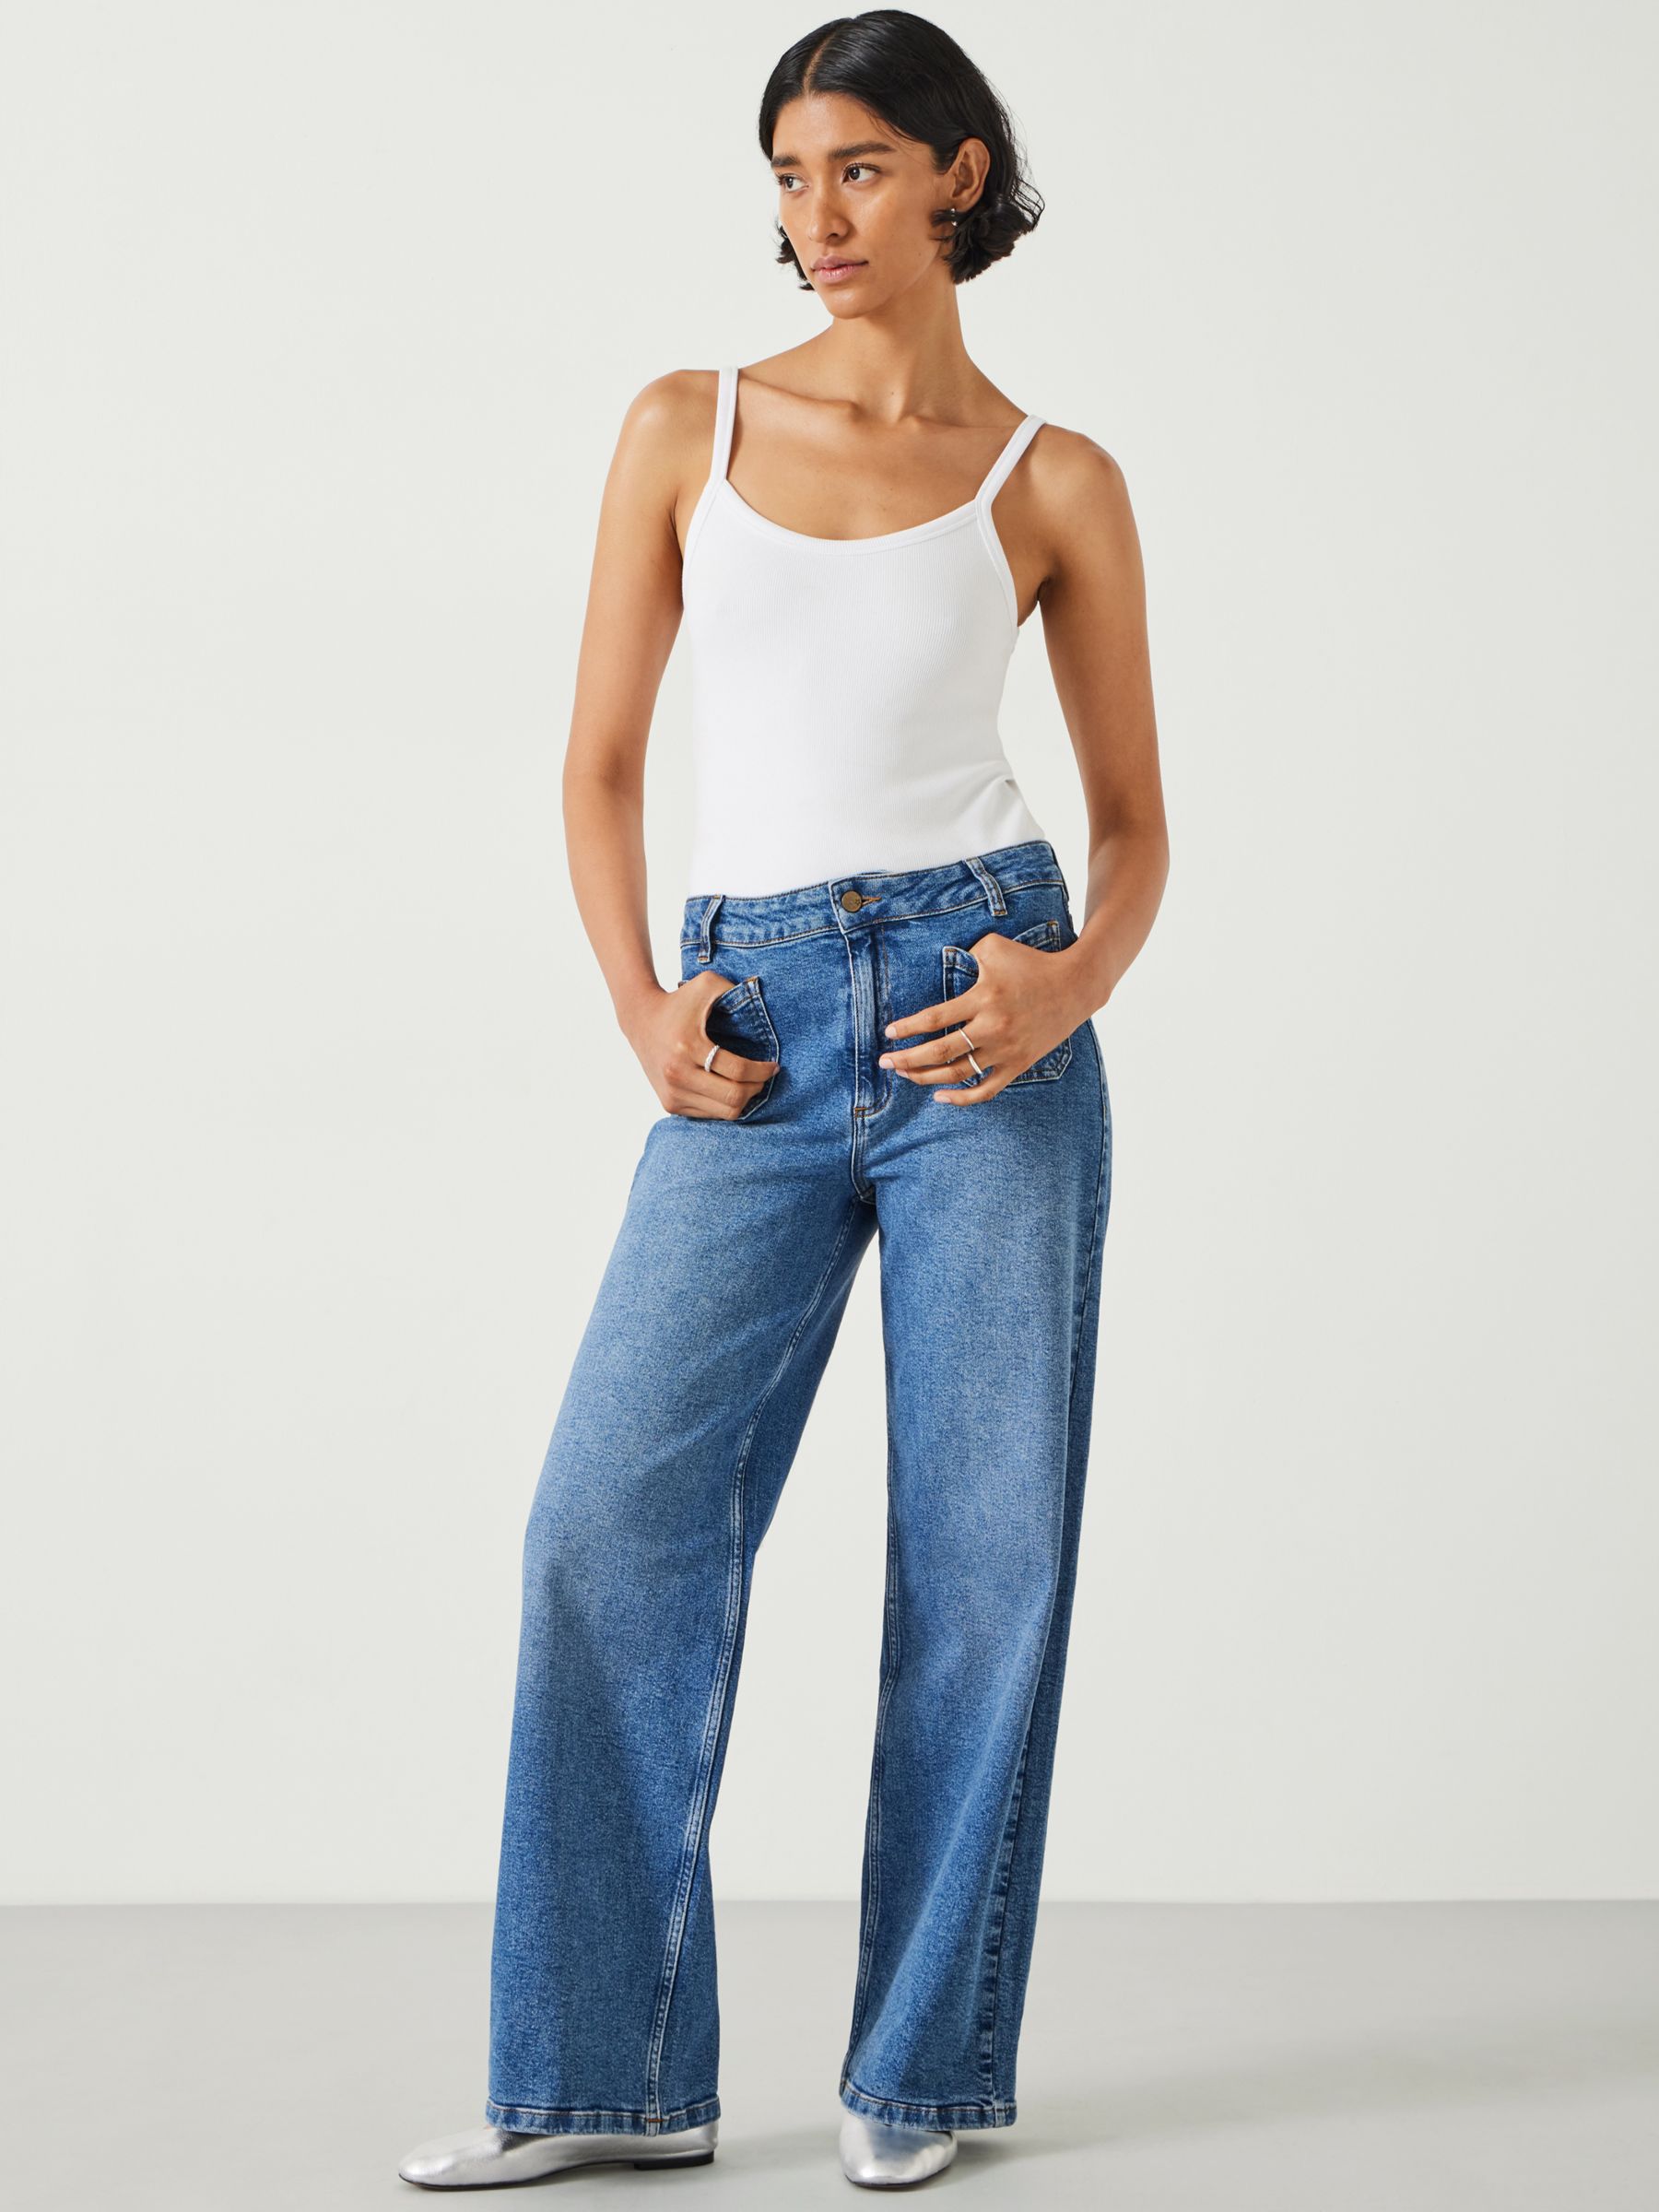 HUSH Rowan Flared Jeans, Mid Authentic Wash at John Lewis & Partners